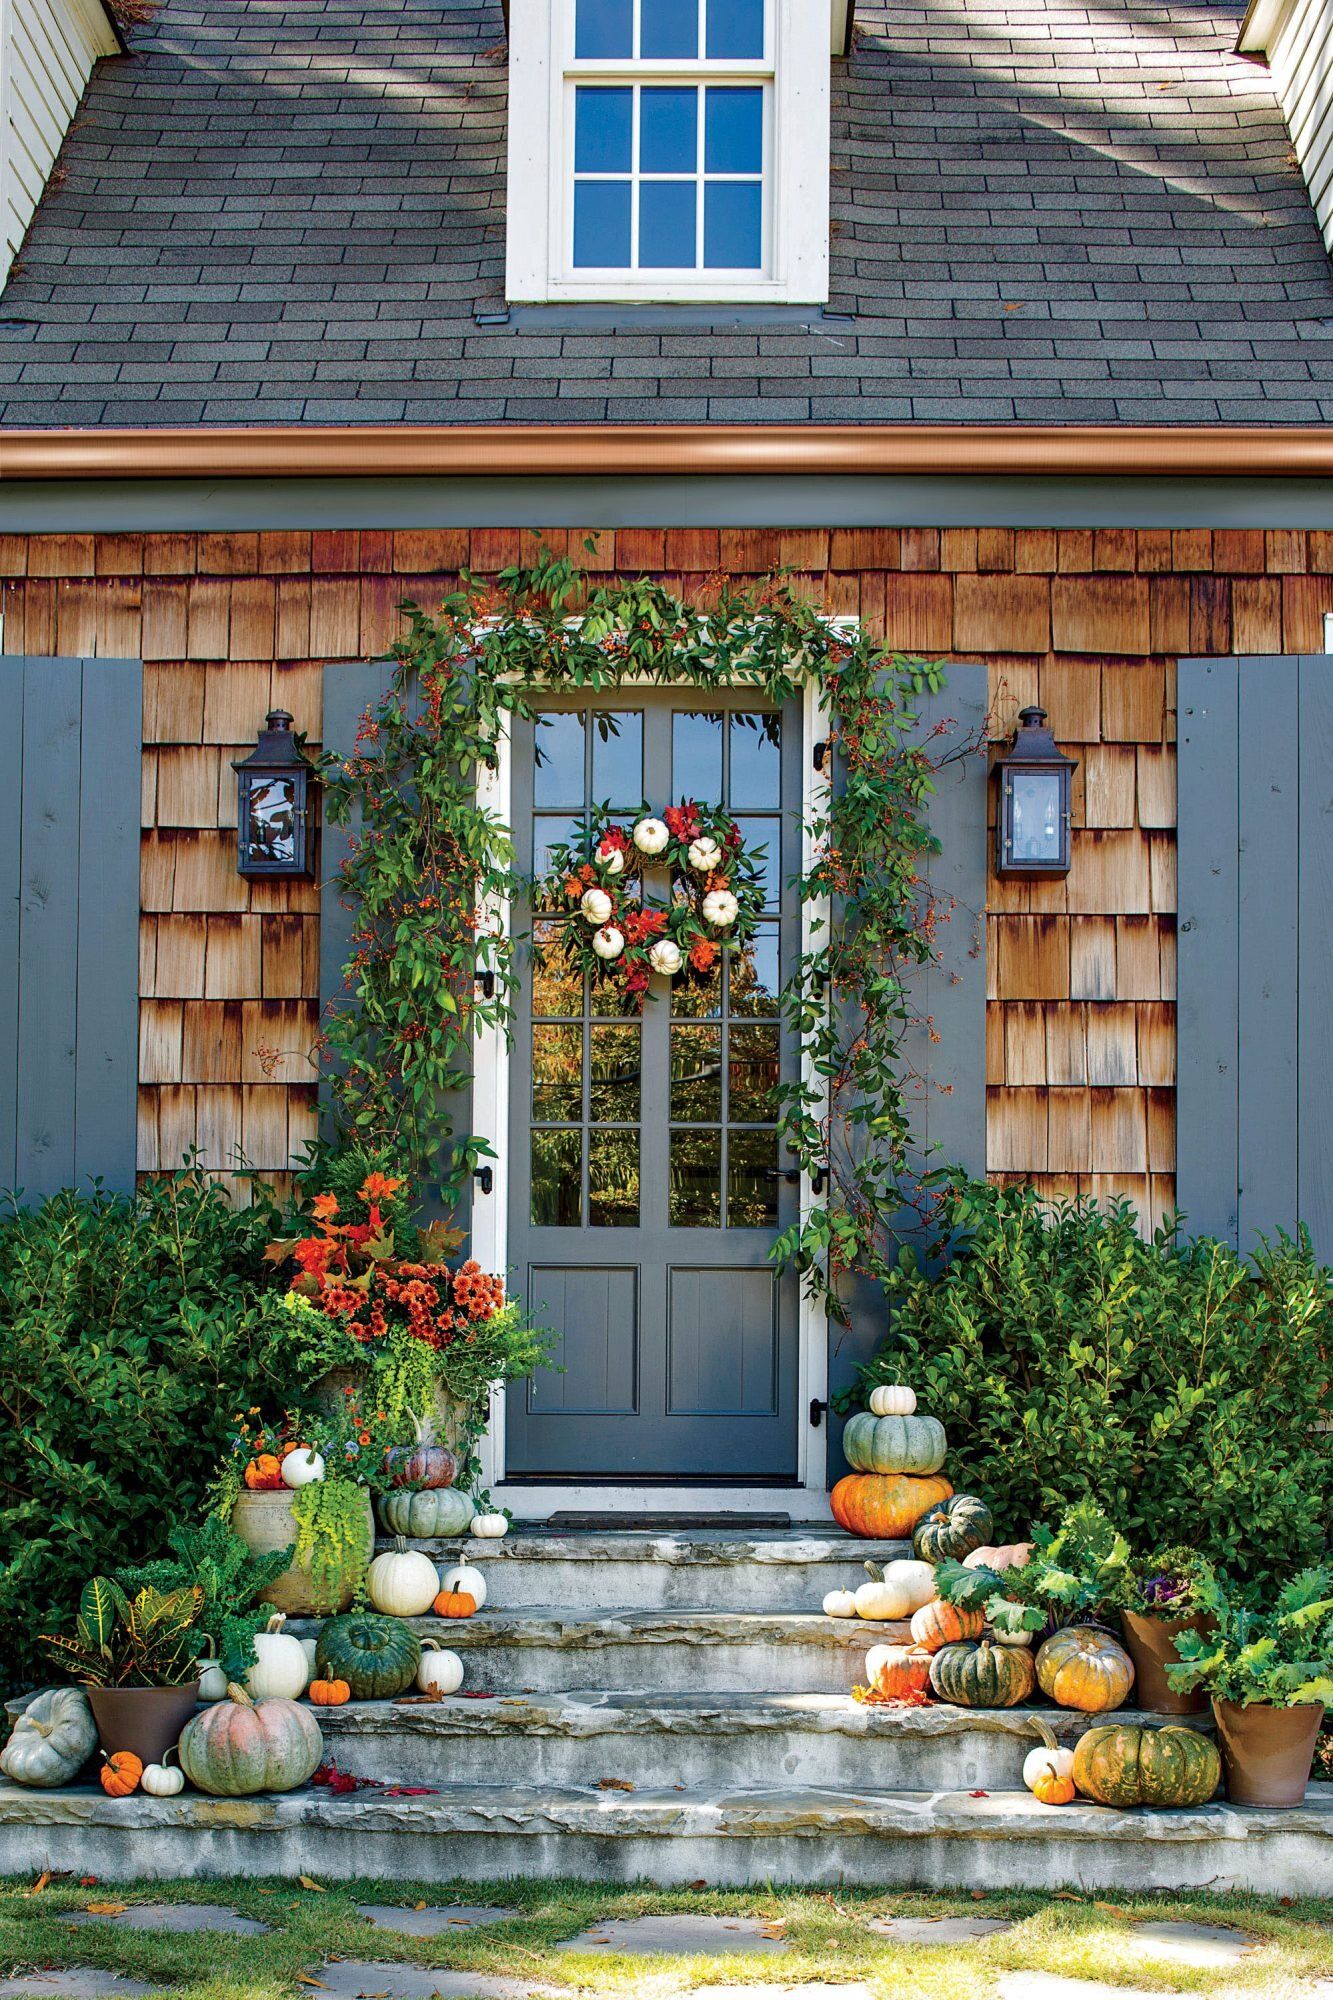 Creative Pumpkin Decorating Ideas for Your Porch